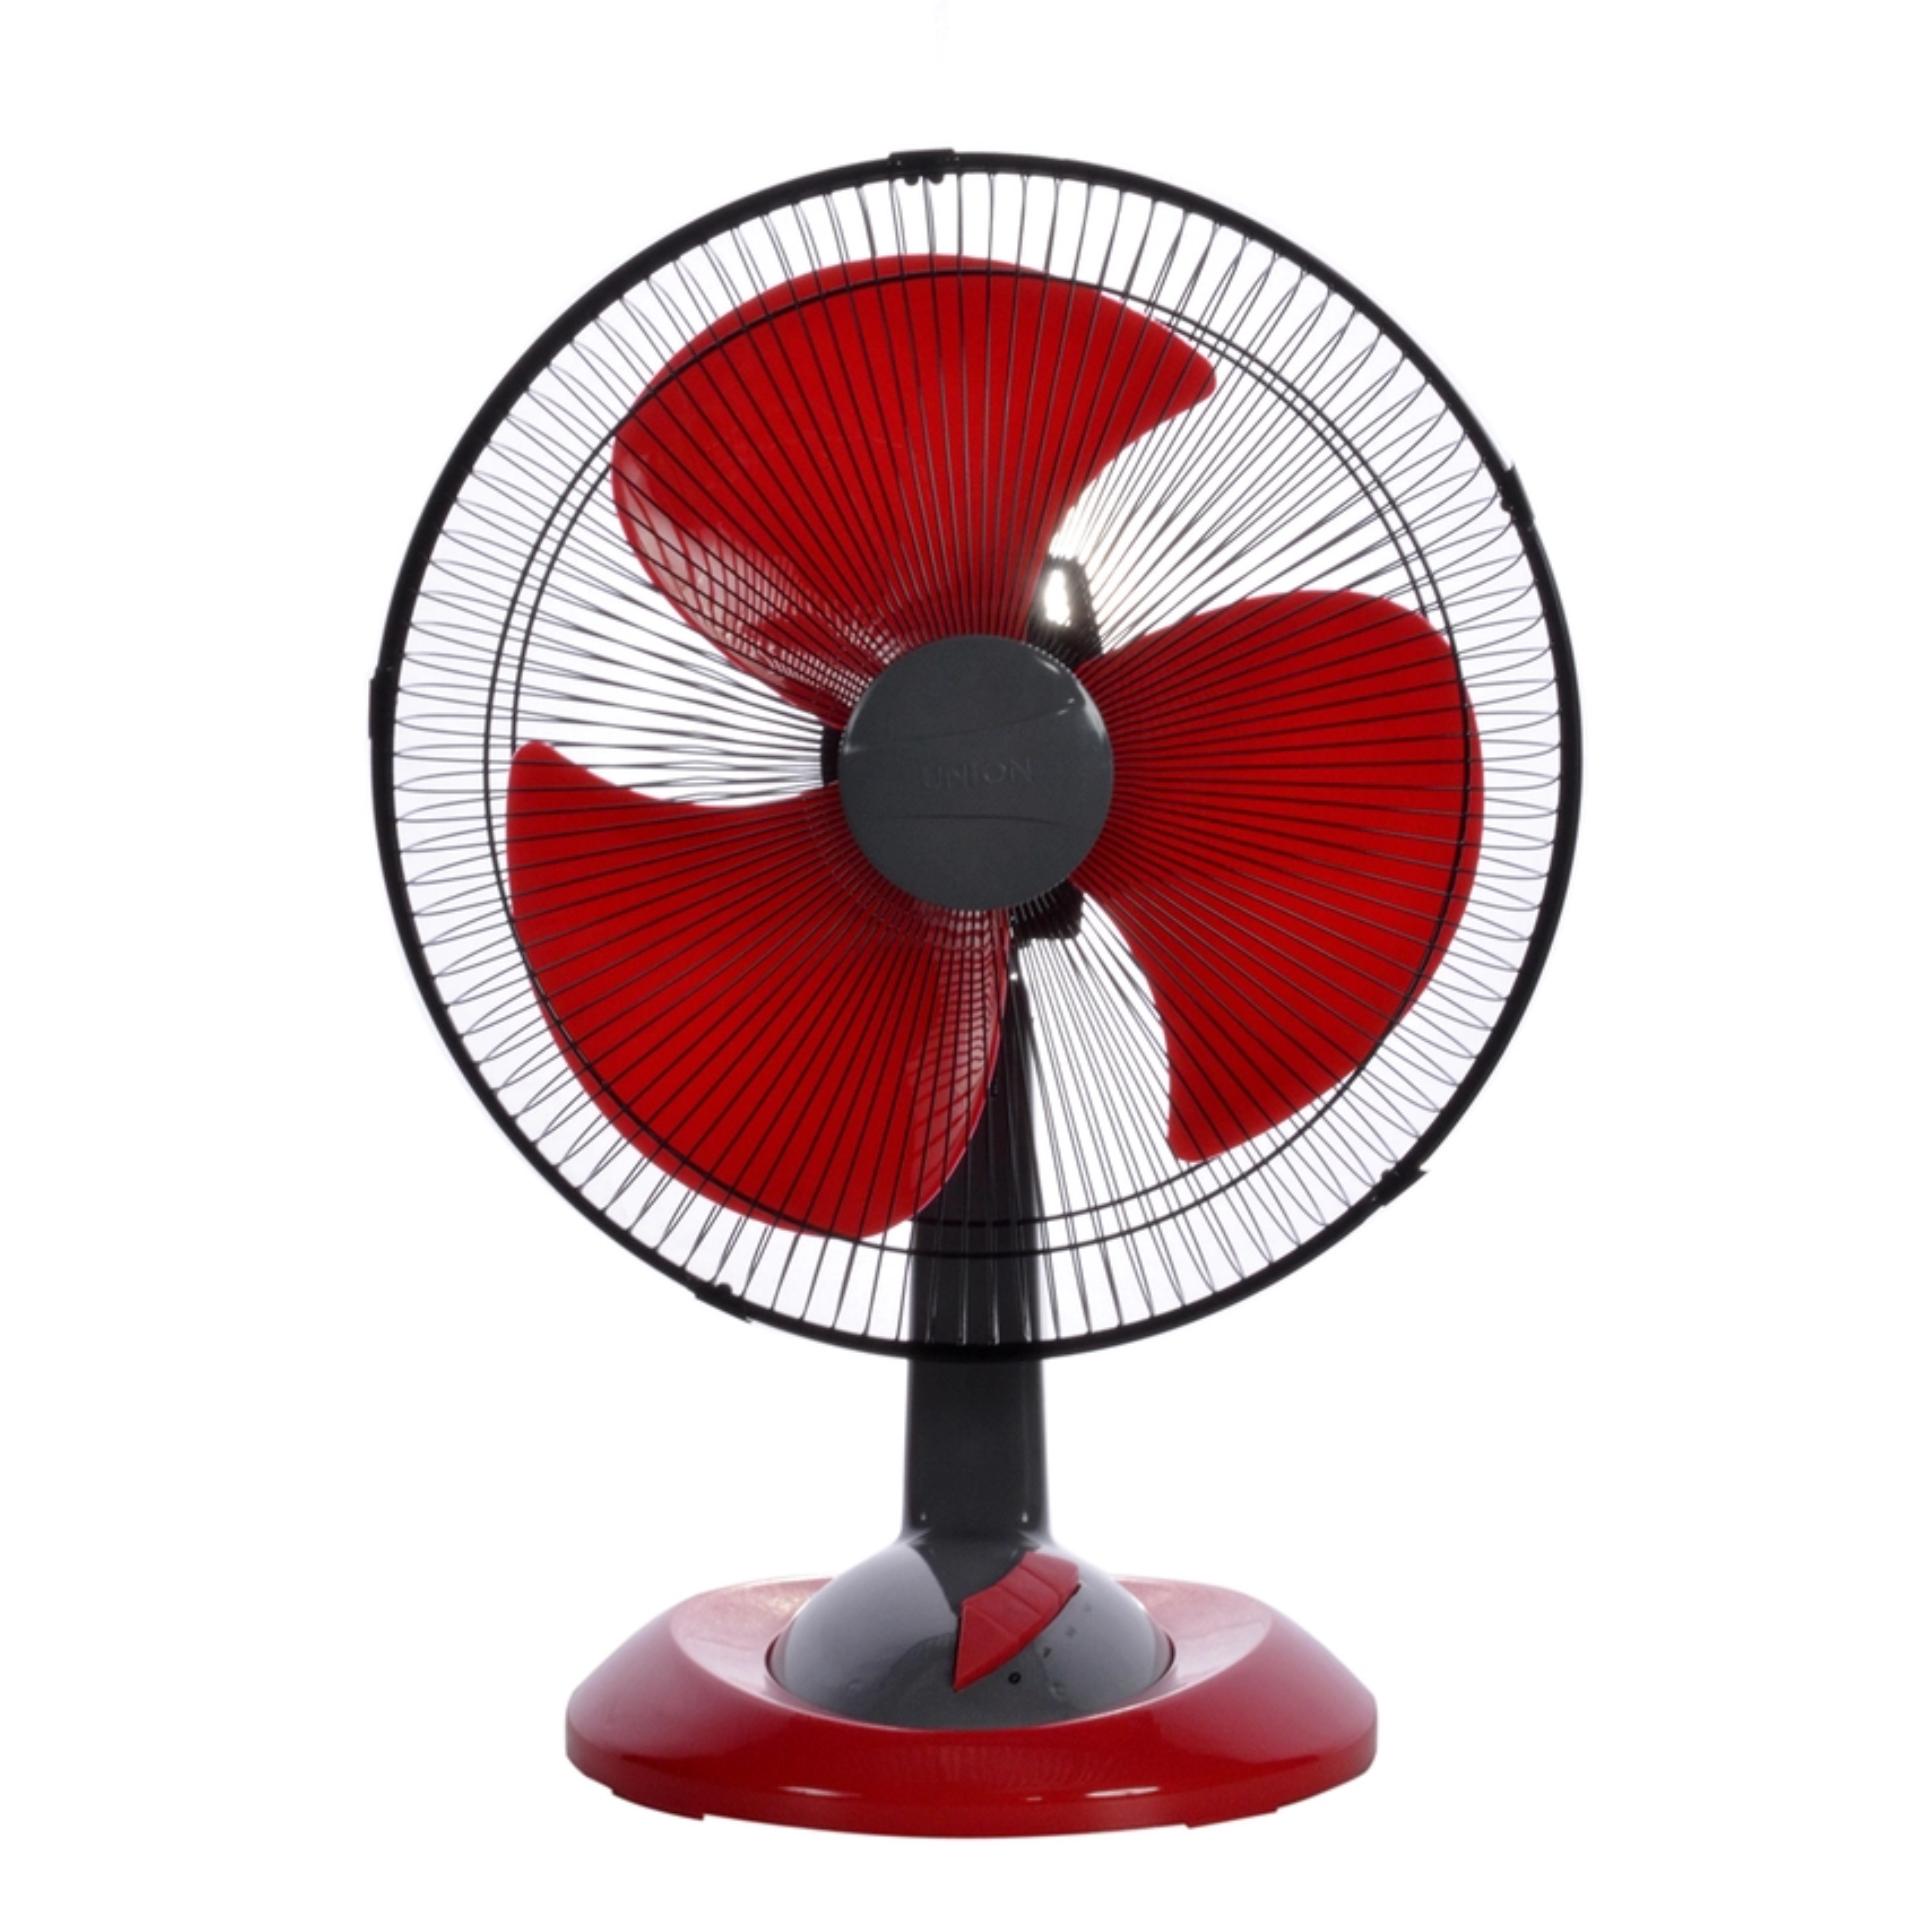 Union Ugm Df1618 16 Desk Fan Red Review And Price